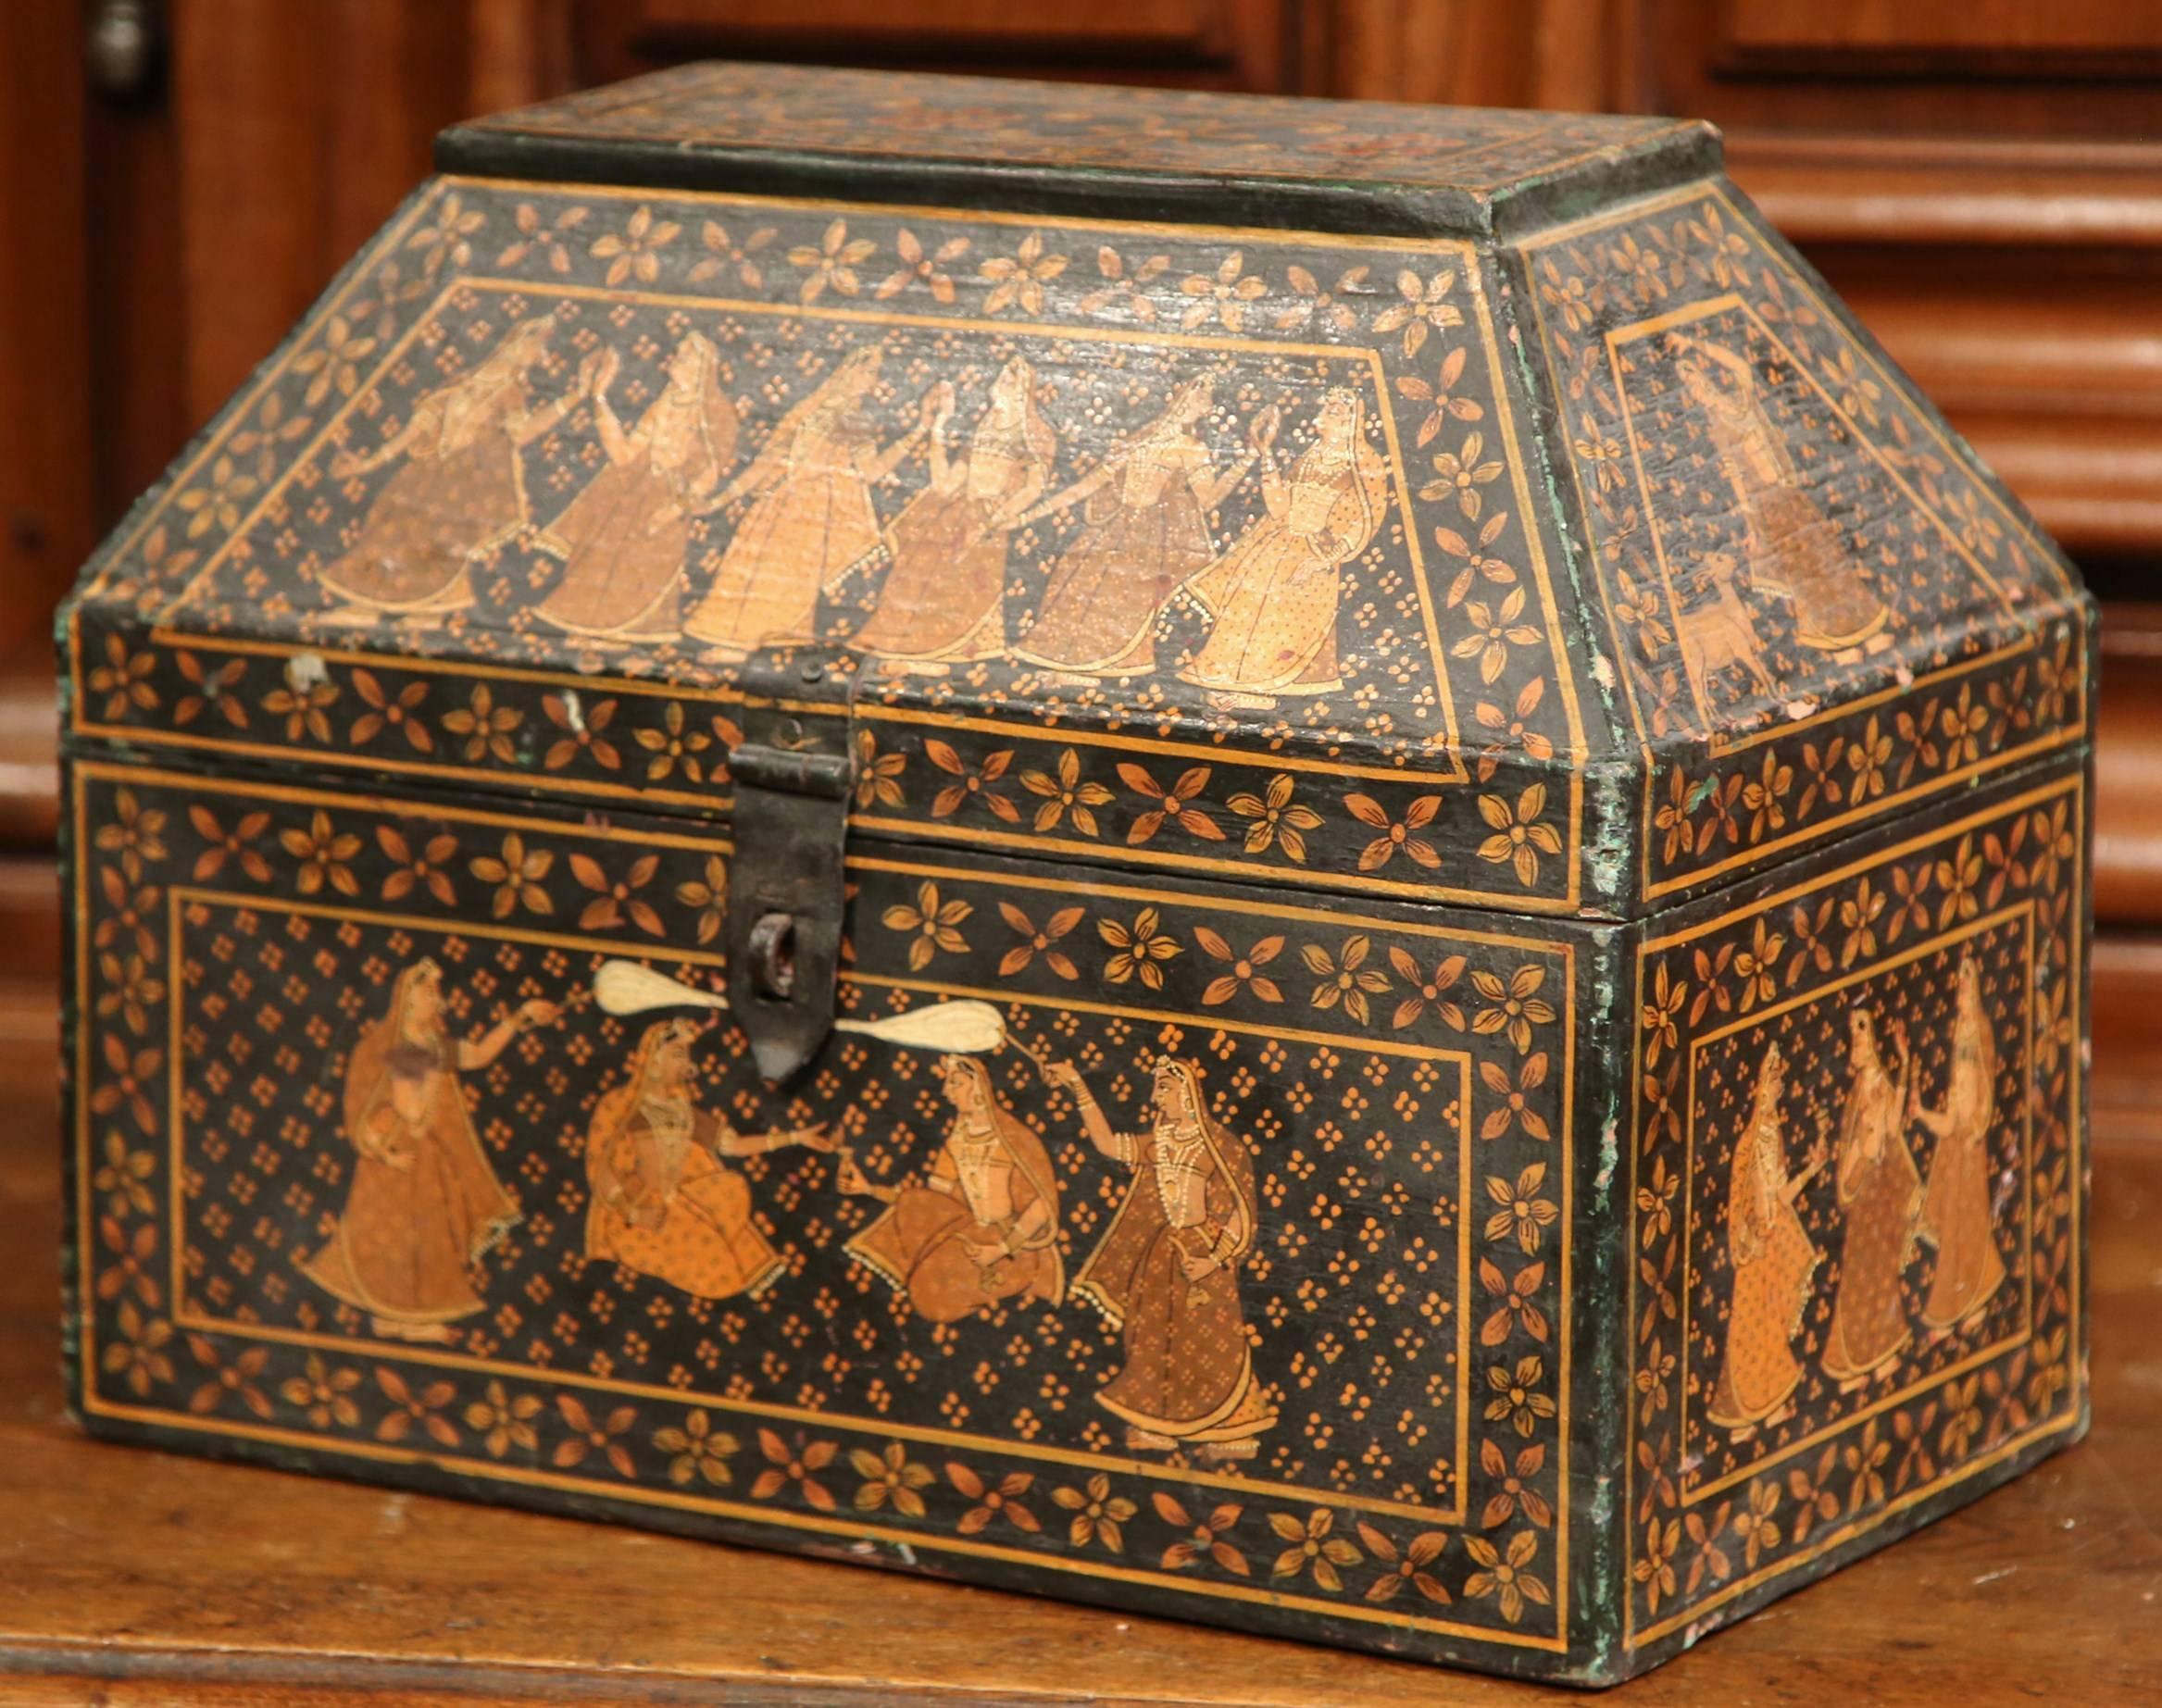 19th Century French Painted Decorative Wood Box with Oriental Figure Decor In Excellent Condition For Sale In Dallas, TX